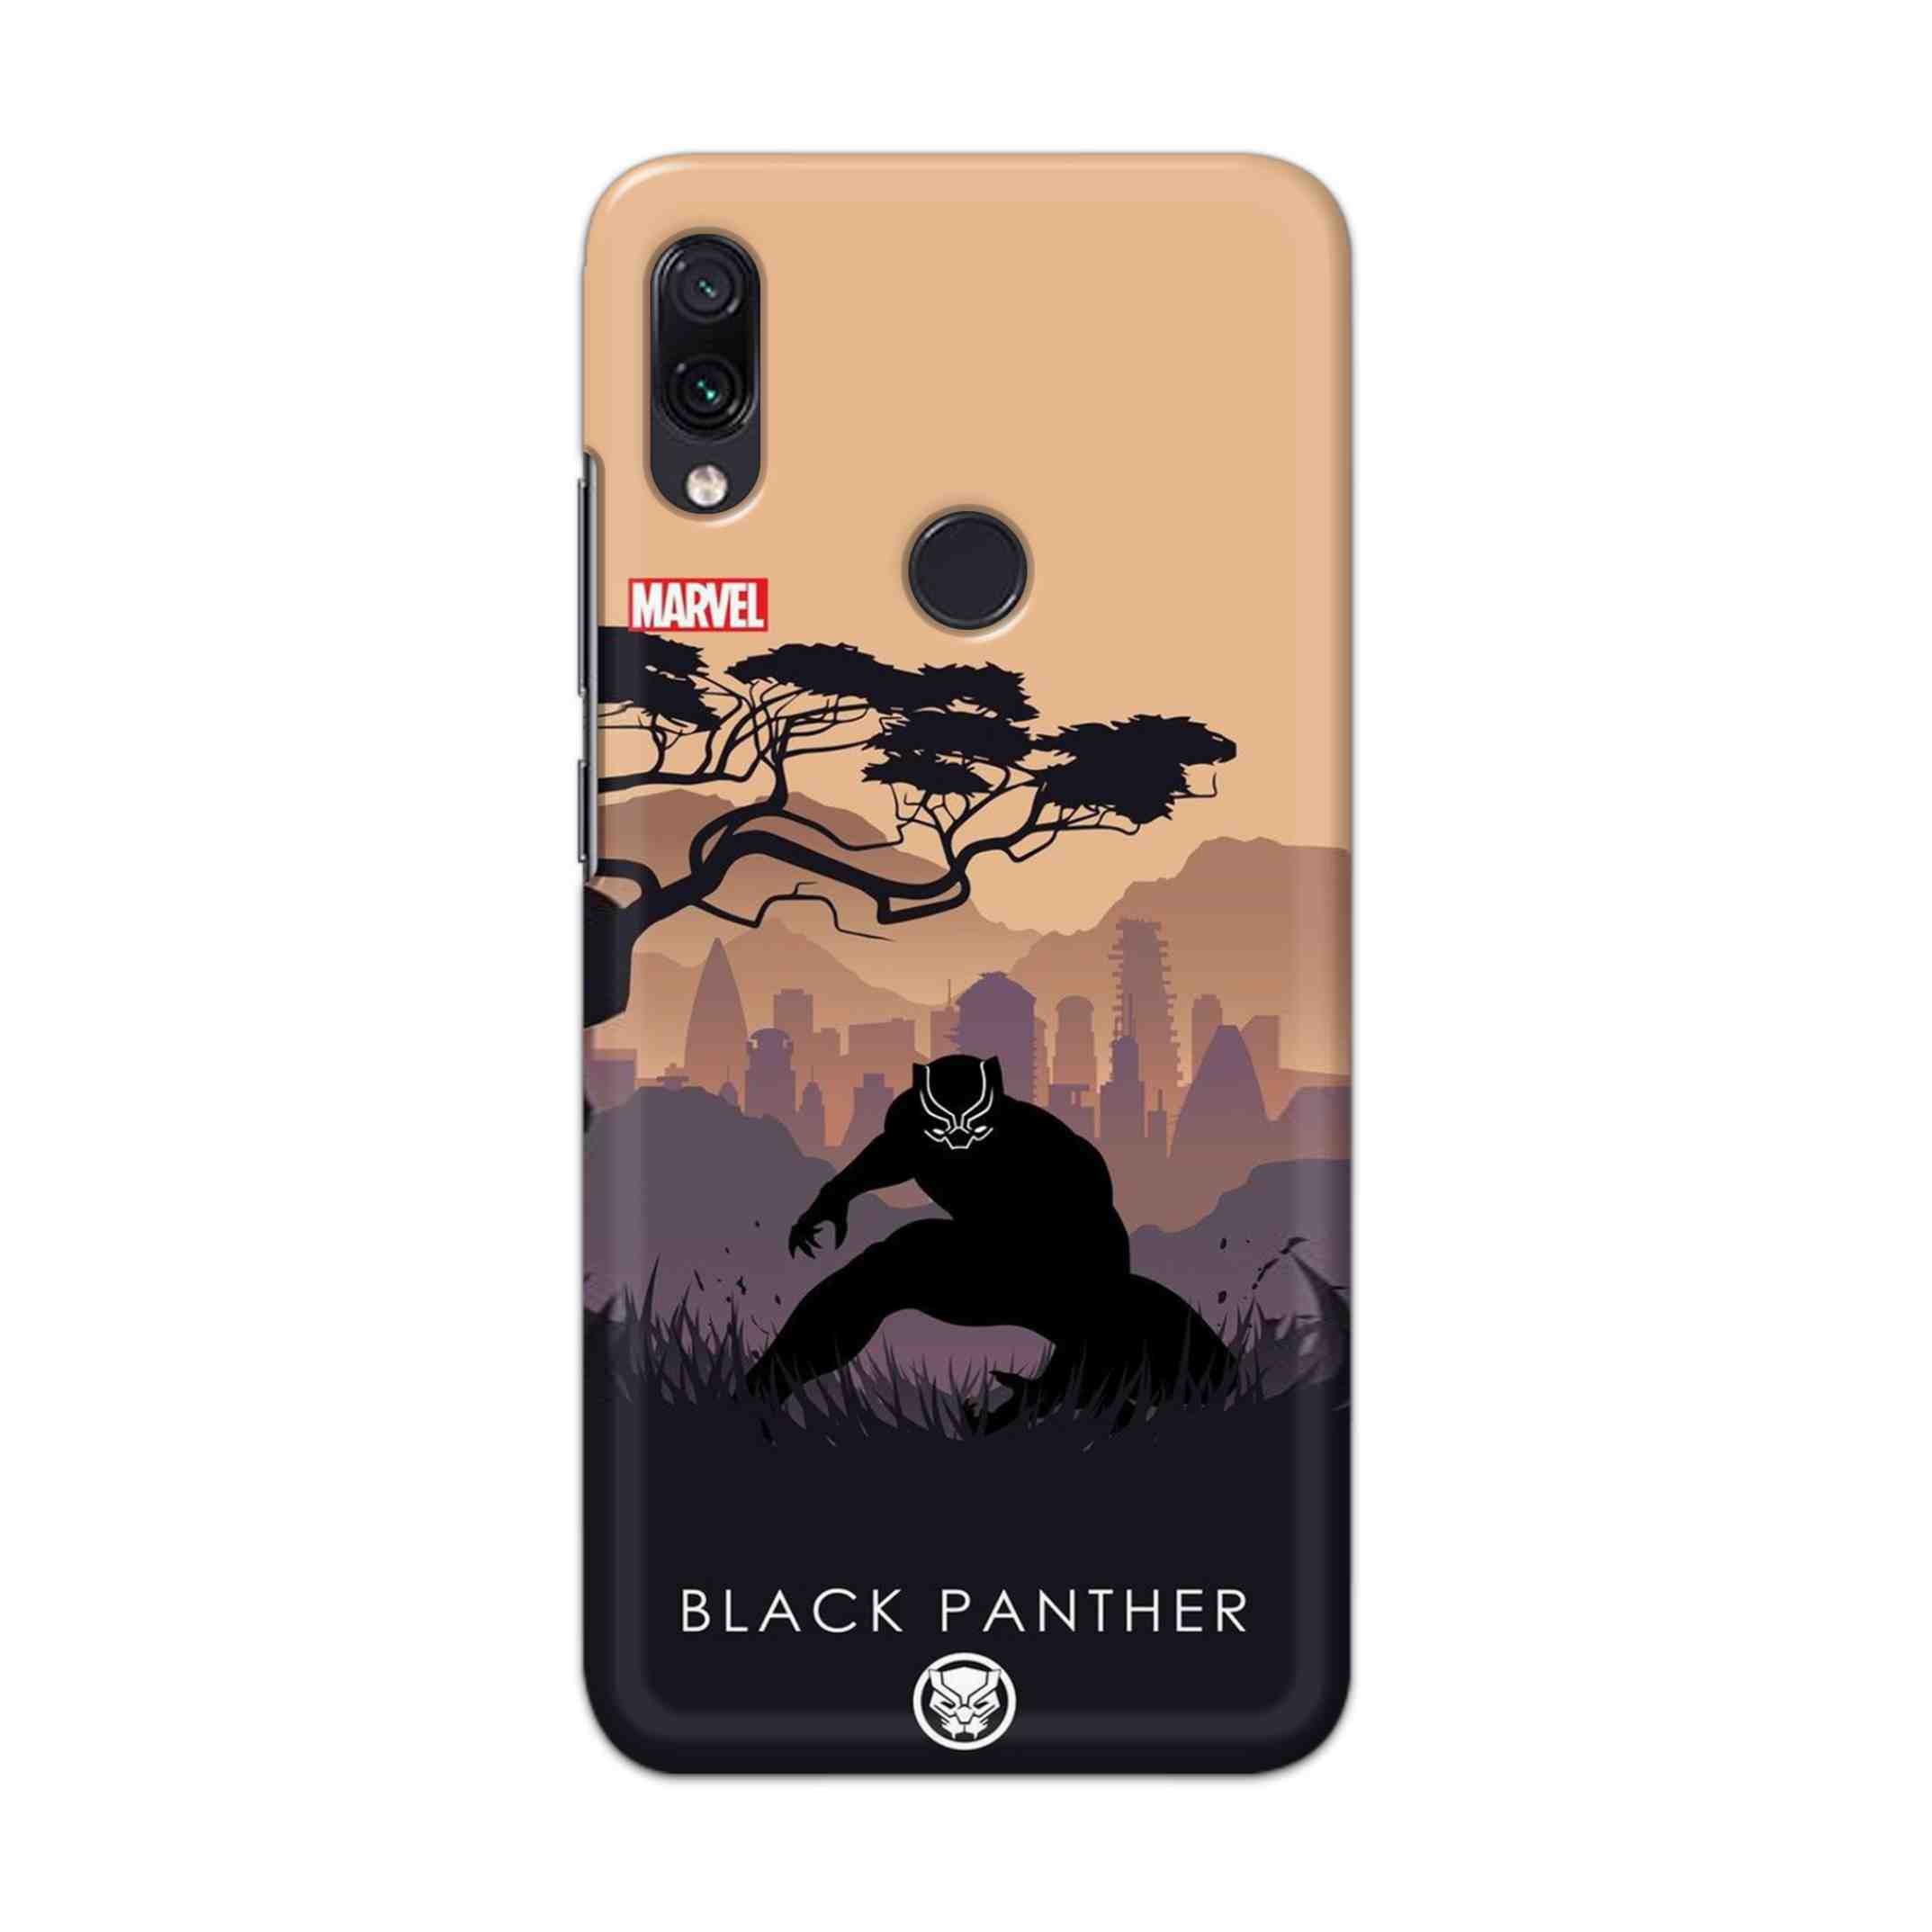 Buy  Black Panther Hard Back Mobile Phone Case Cover For Redmi Note 7 / Note 7 Pro Online